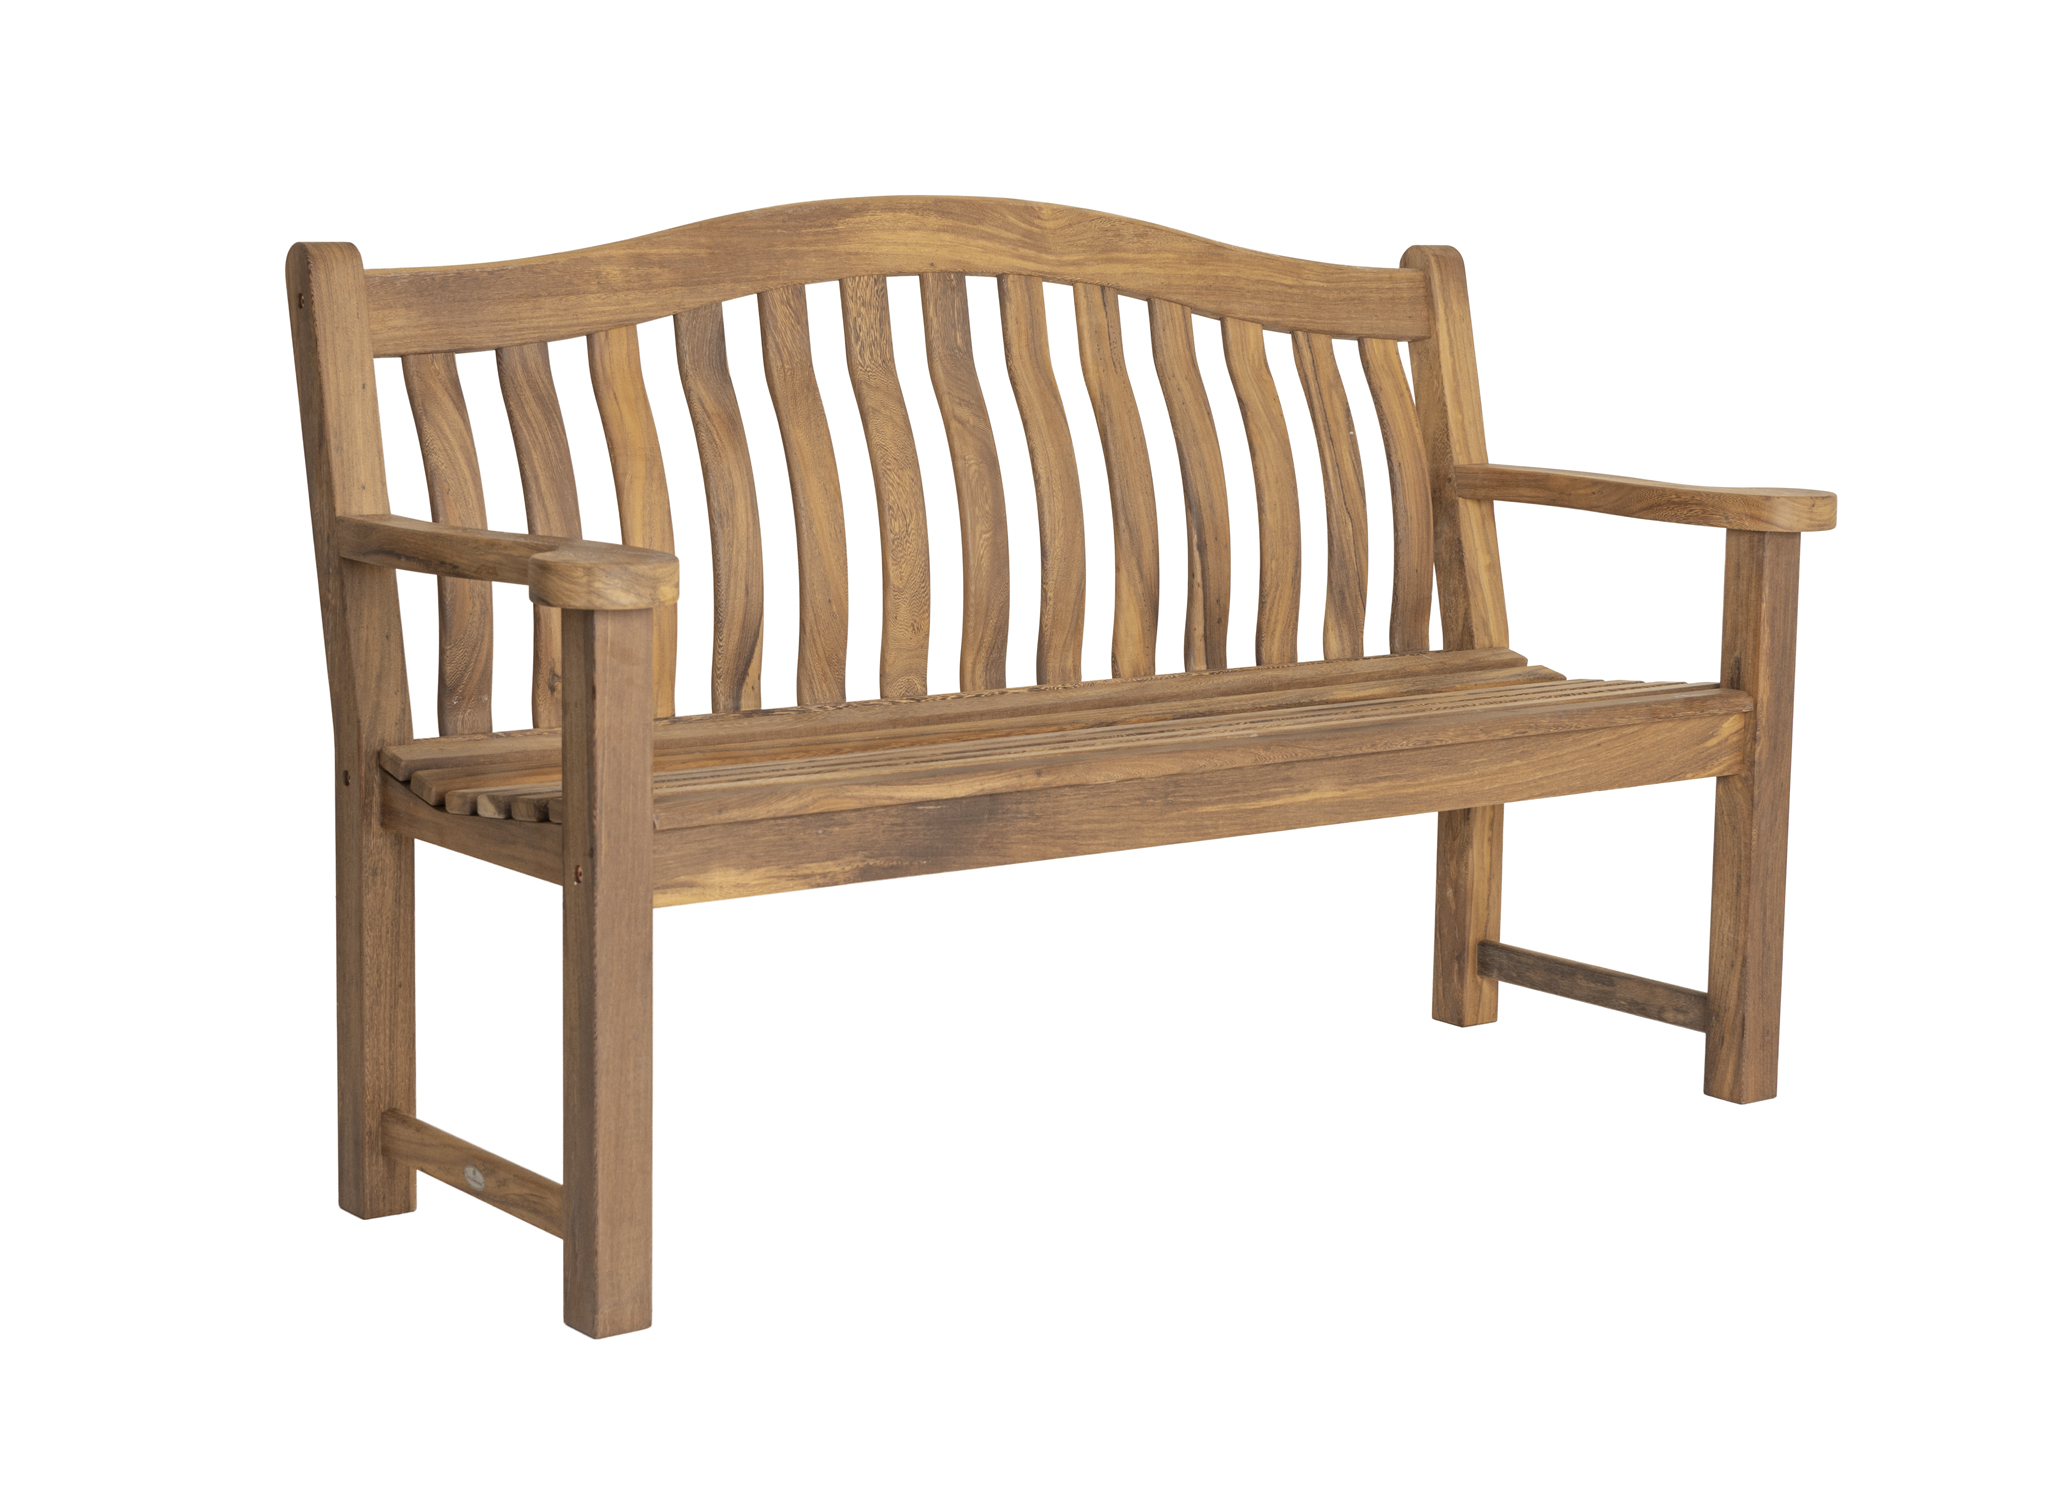 Albany Turnberry Bench 5ft